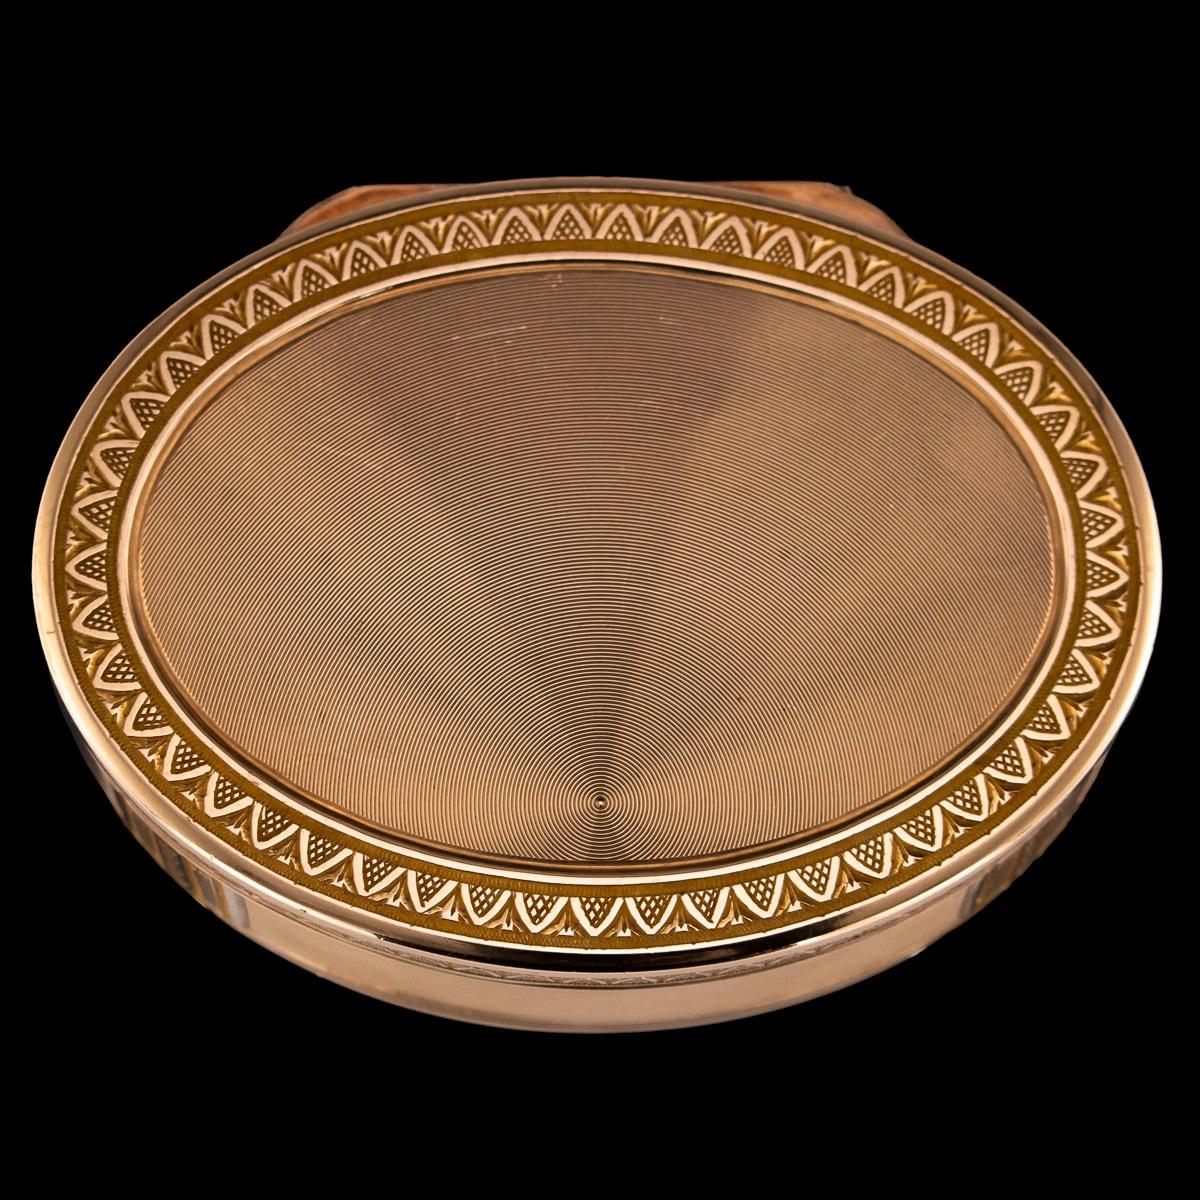 Antique 19th century French magnificent 18-karat gold snuff box, of traditional oval form, engine turned, sides chased with acanthus leaf boarders and engine turned sunburst ground. Hallmarked 18-karat (750 gold standard), Makers mark FO (unknown to